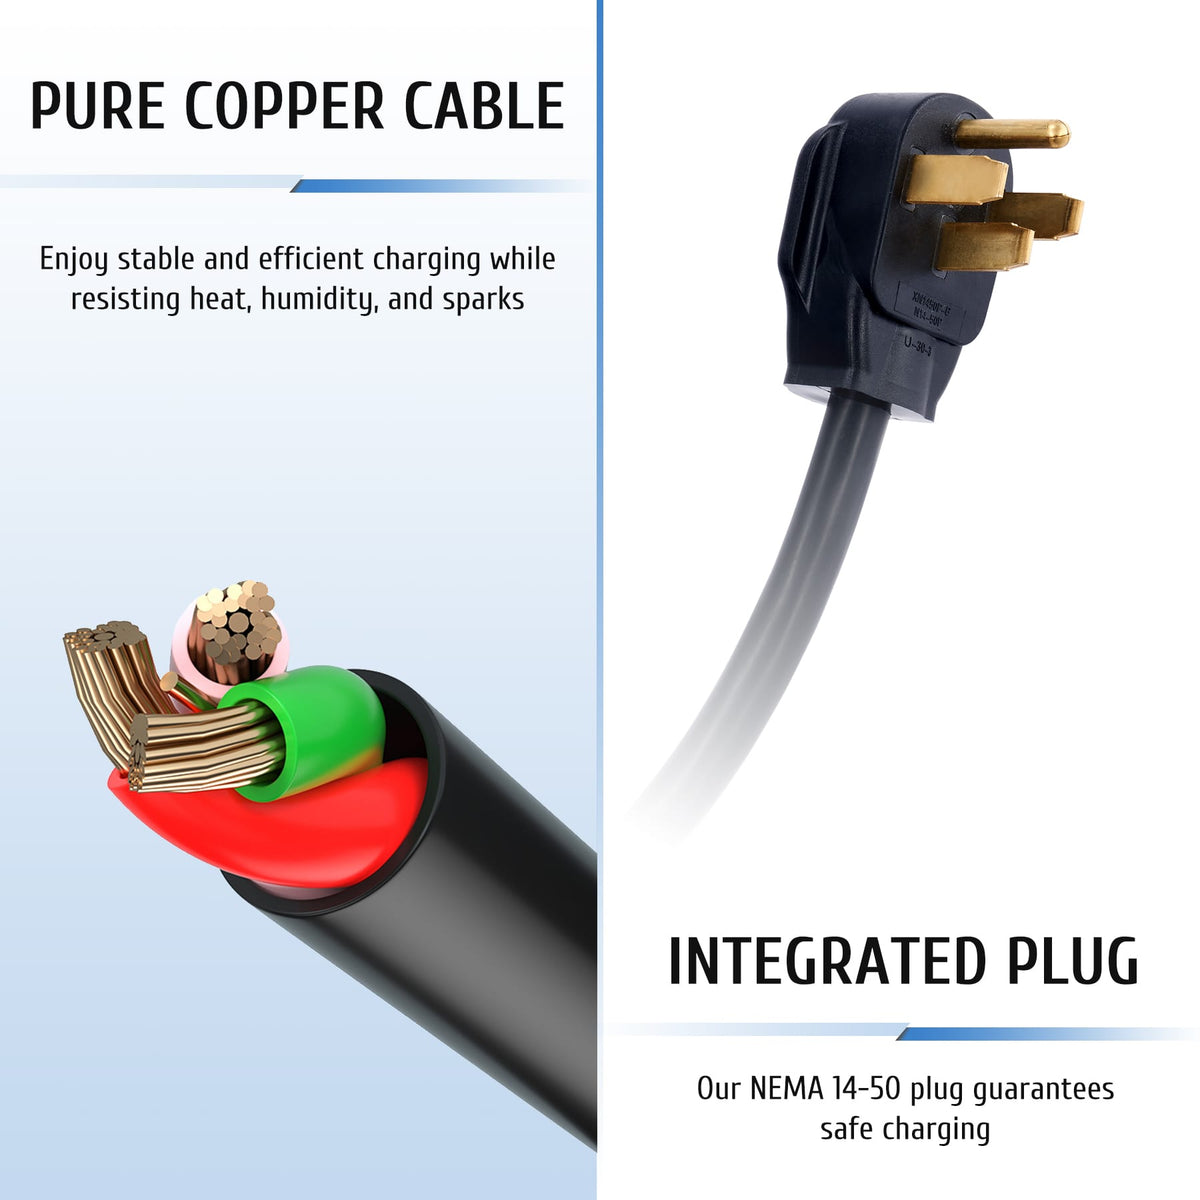 oure-copper-cable-integrated-plug